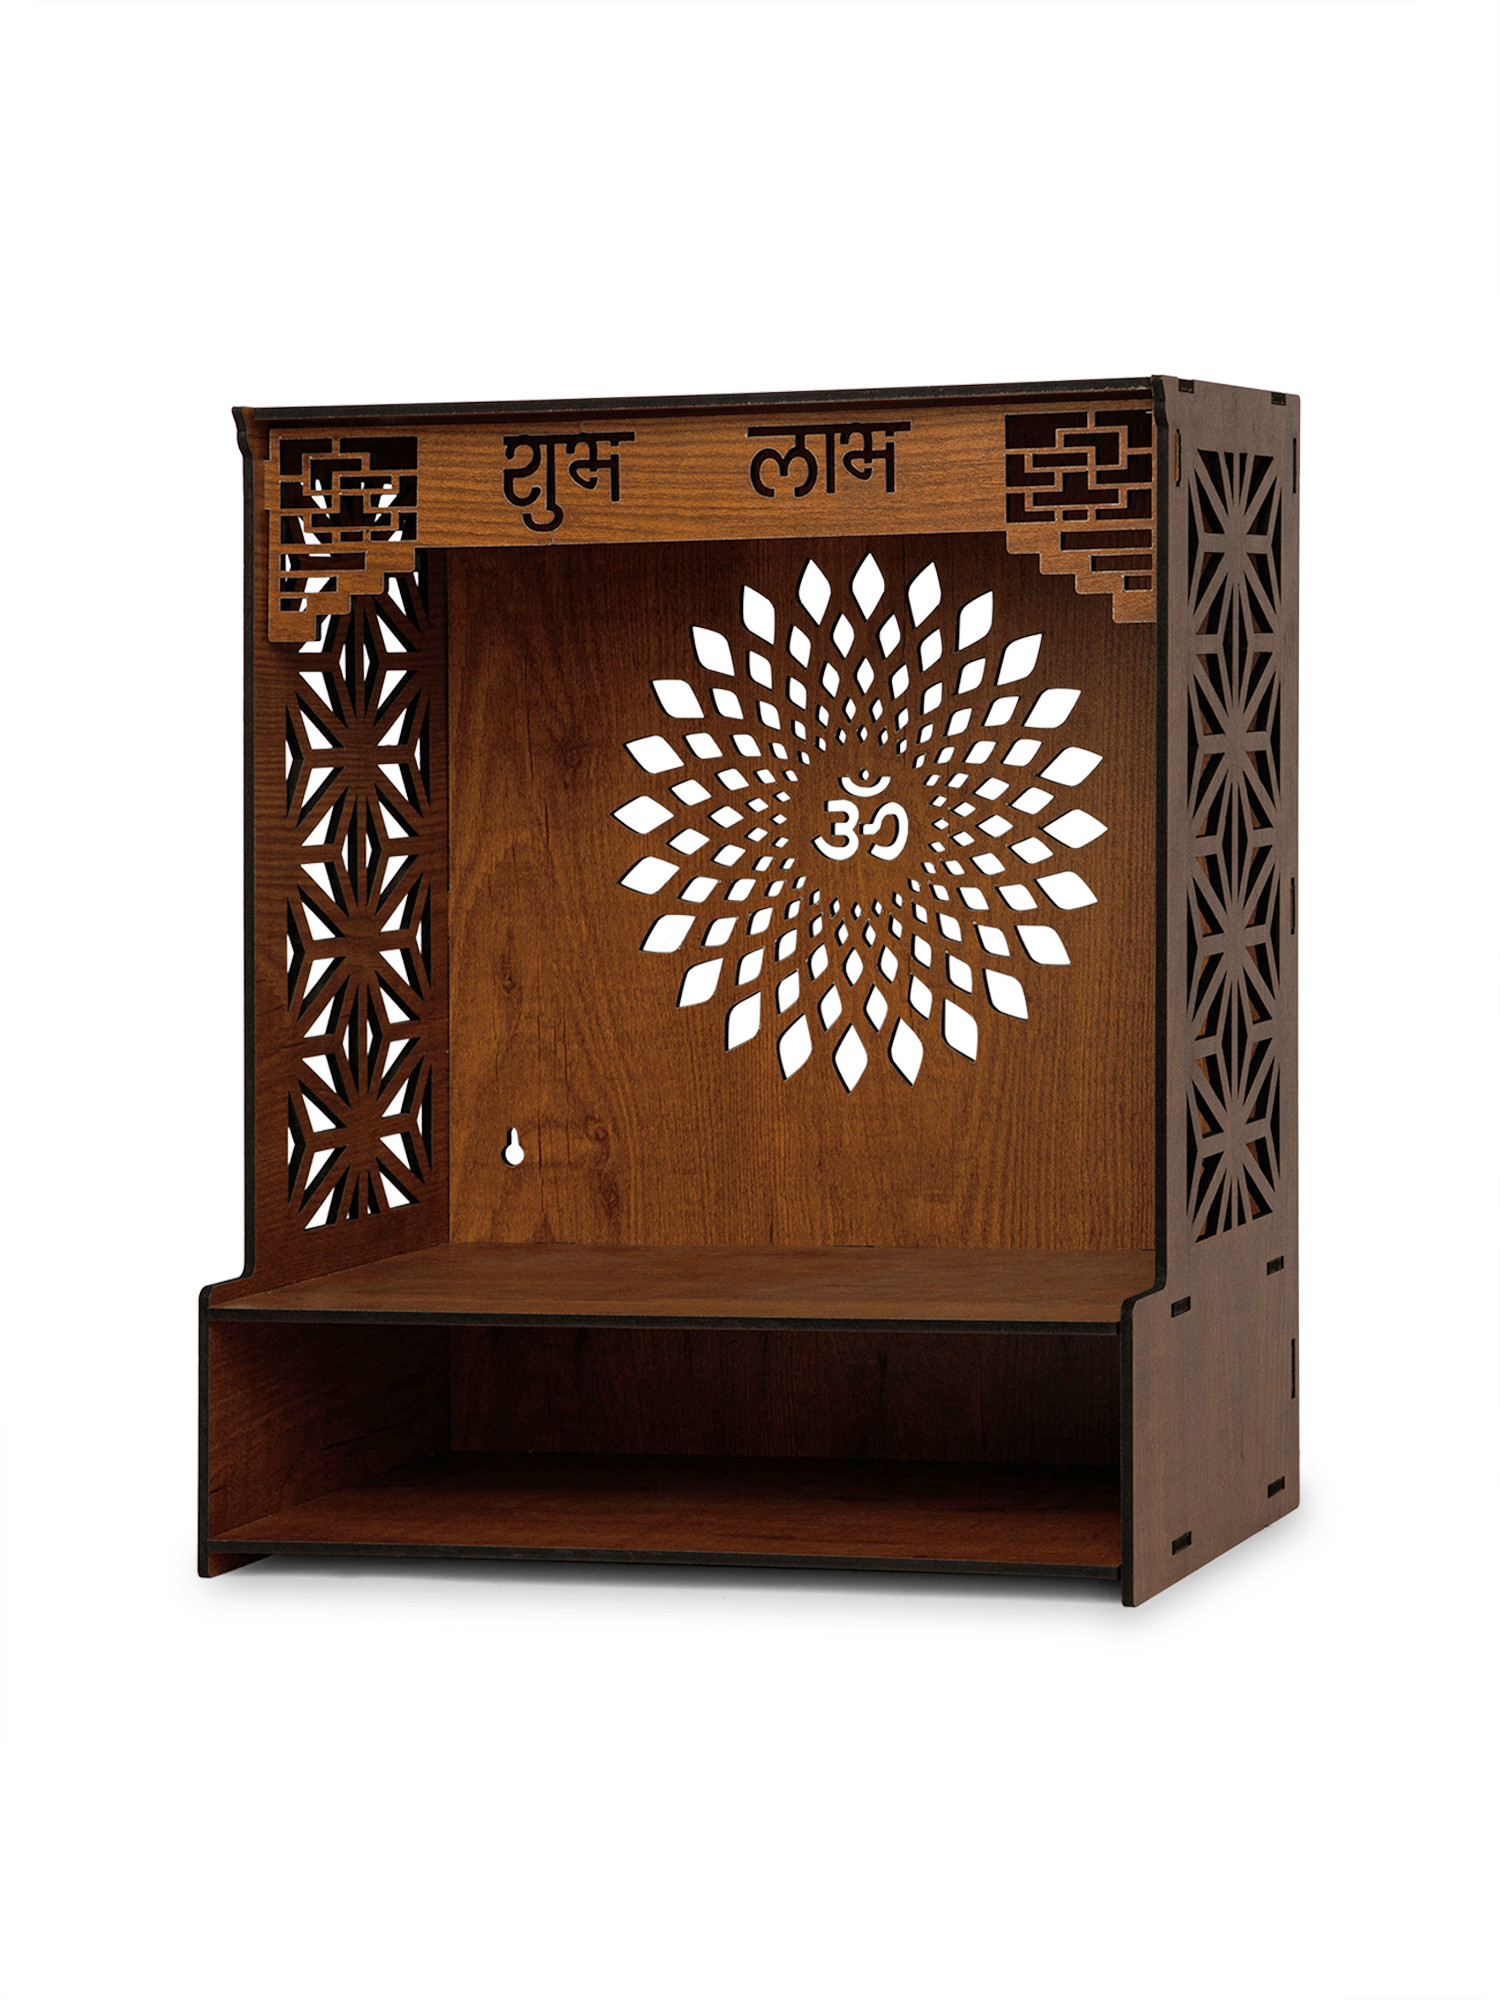 Kuber Industries Pooja Mandir | Pooja Stand for Home | Temple for Home and Office | Wall Mounted Home Temple | Pooja Mandir Stand for Home | Subh Labh Temple | Grandapine